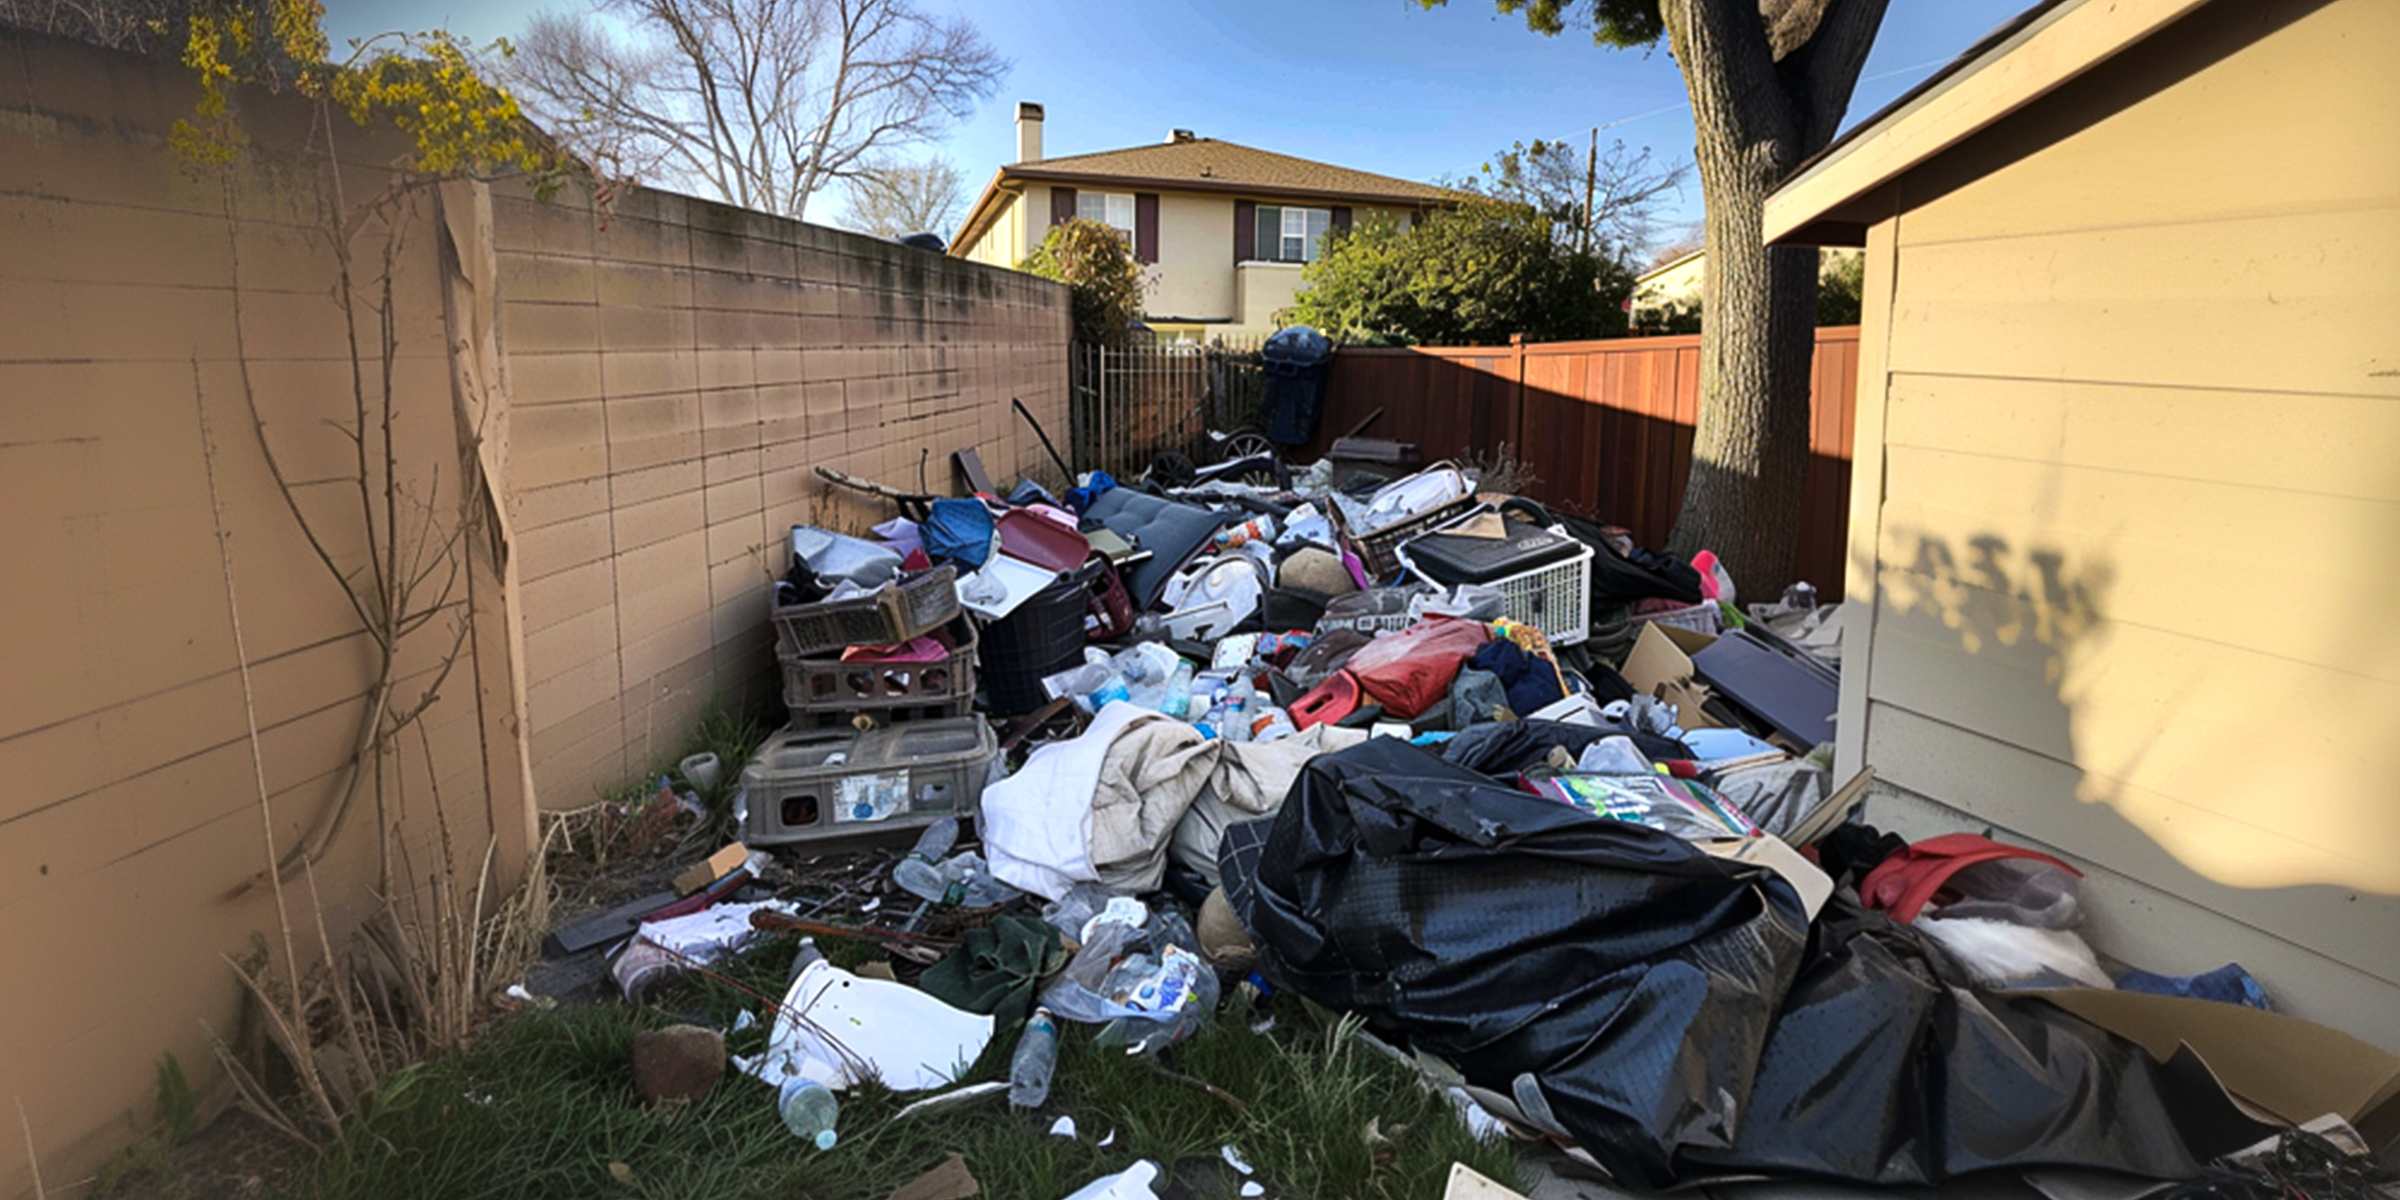 Pile of garbage dumped on a backyard | Source: AmoMama